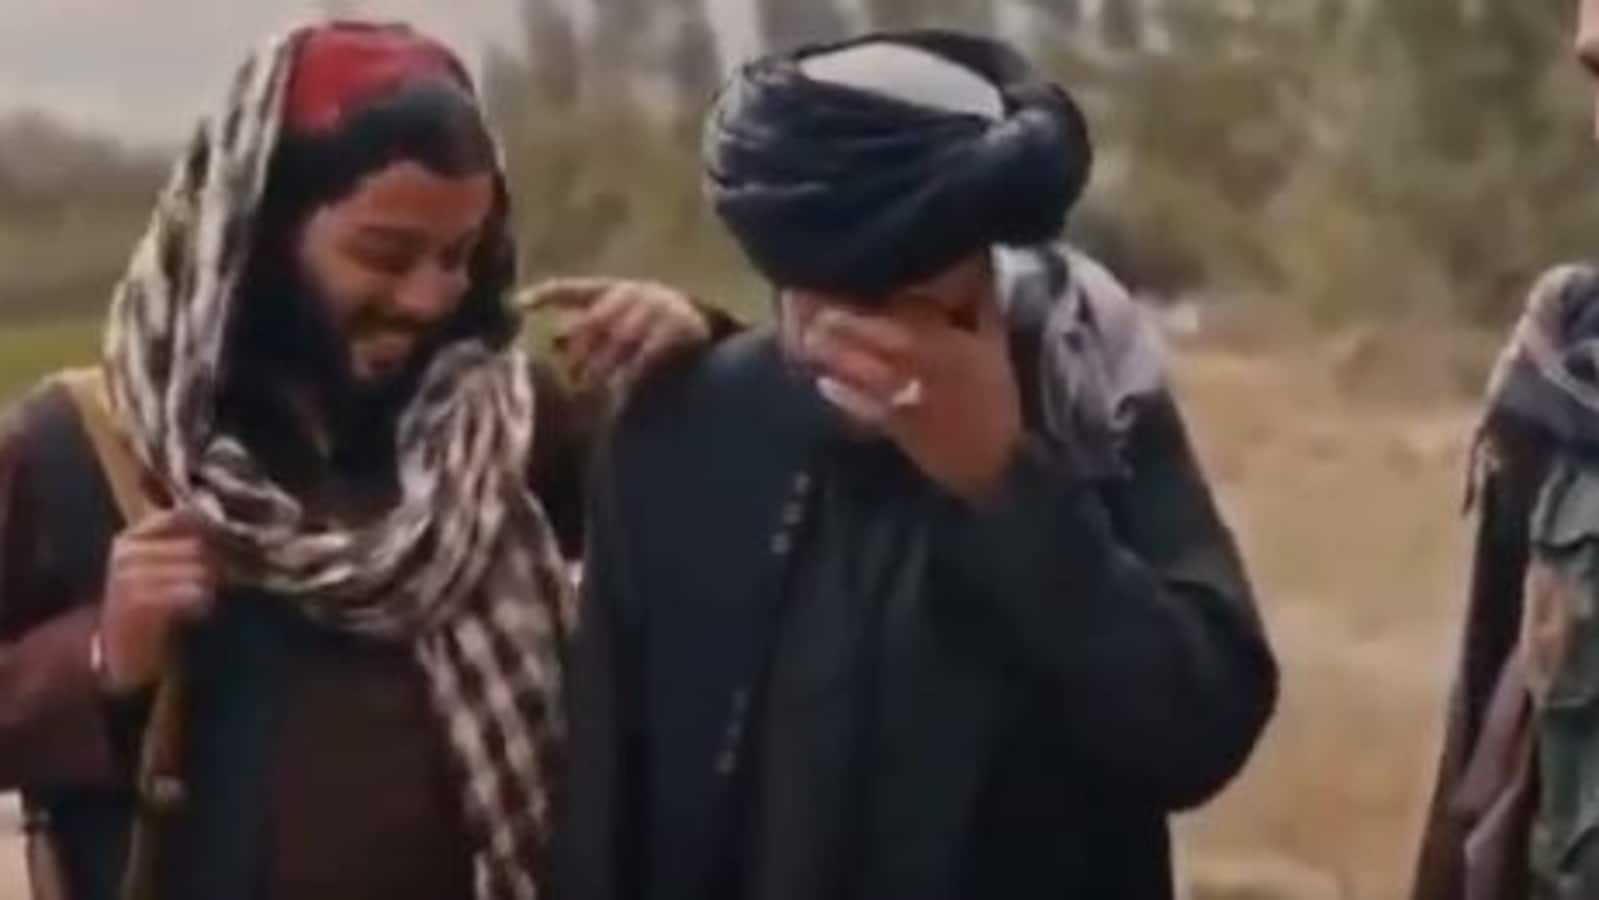 Old video of Taliban fighters laughing about women politicians ...